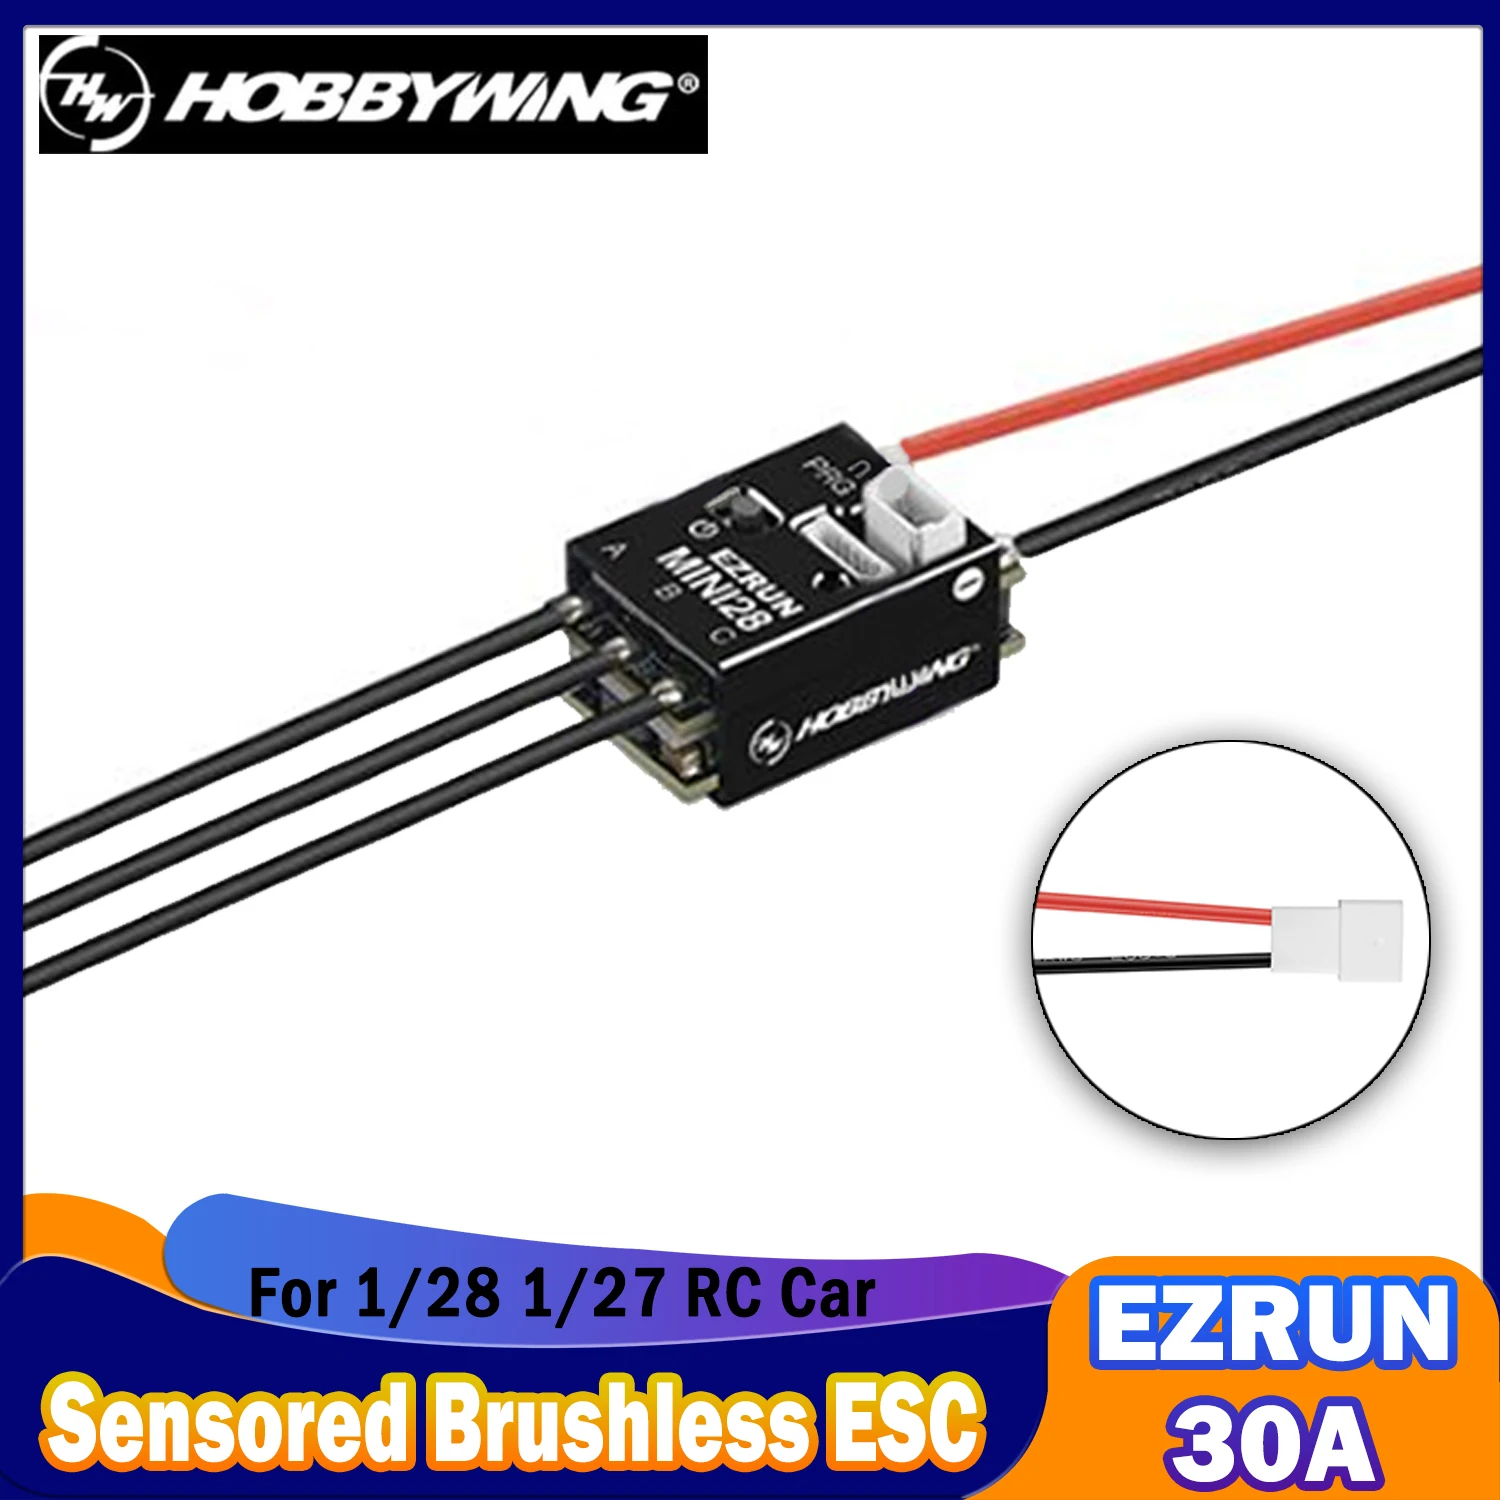 

Hobbywing EZRUN MINI28 1/28 Car 30A Sensored Brushless ESC 2S BEC Speed Controller OTA for 1/27 RC Model Competitions Racing Toy